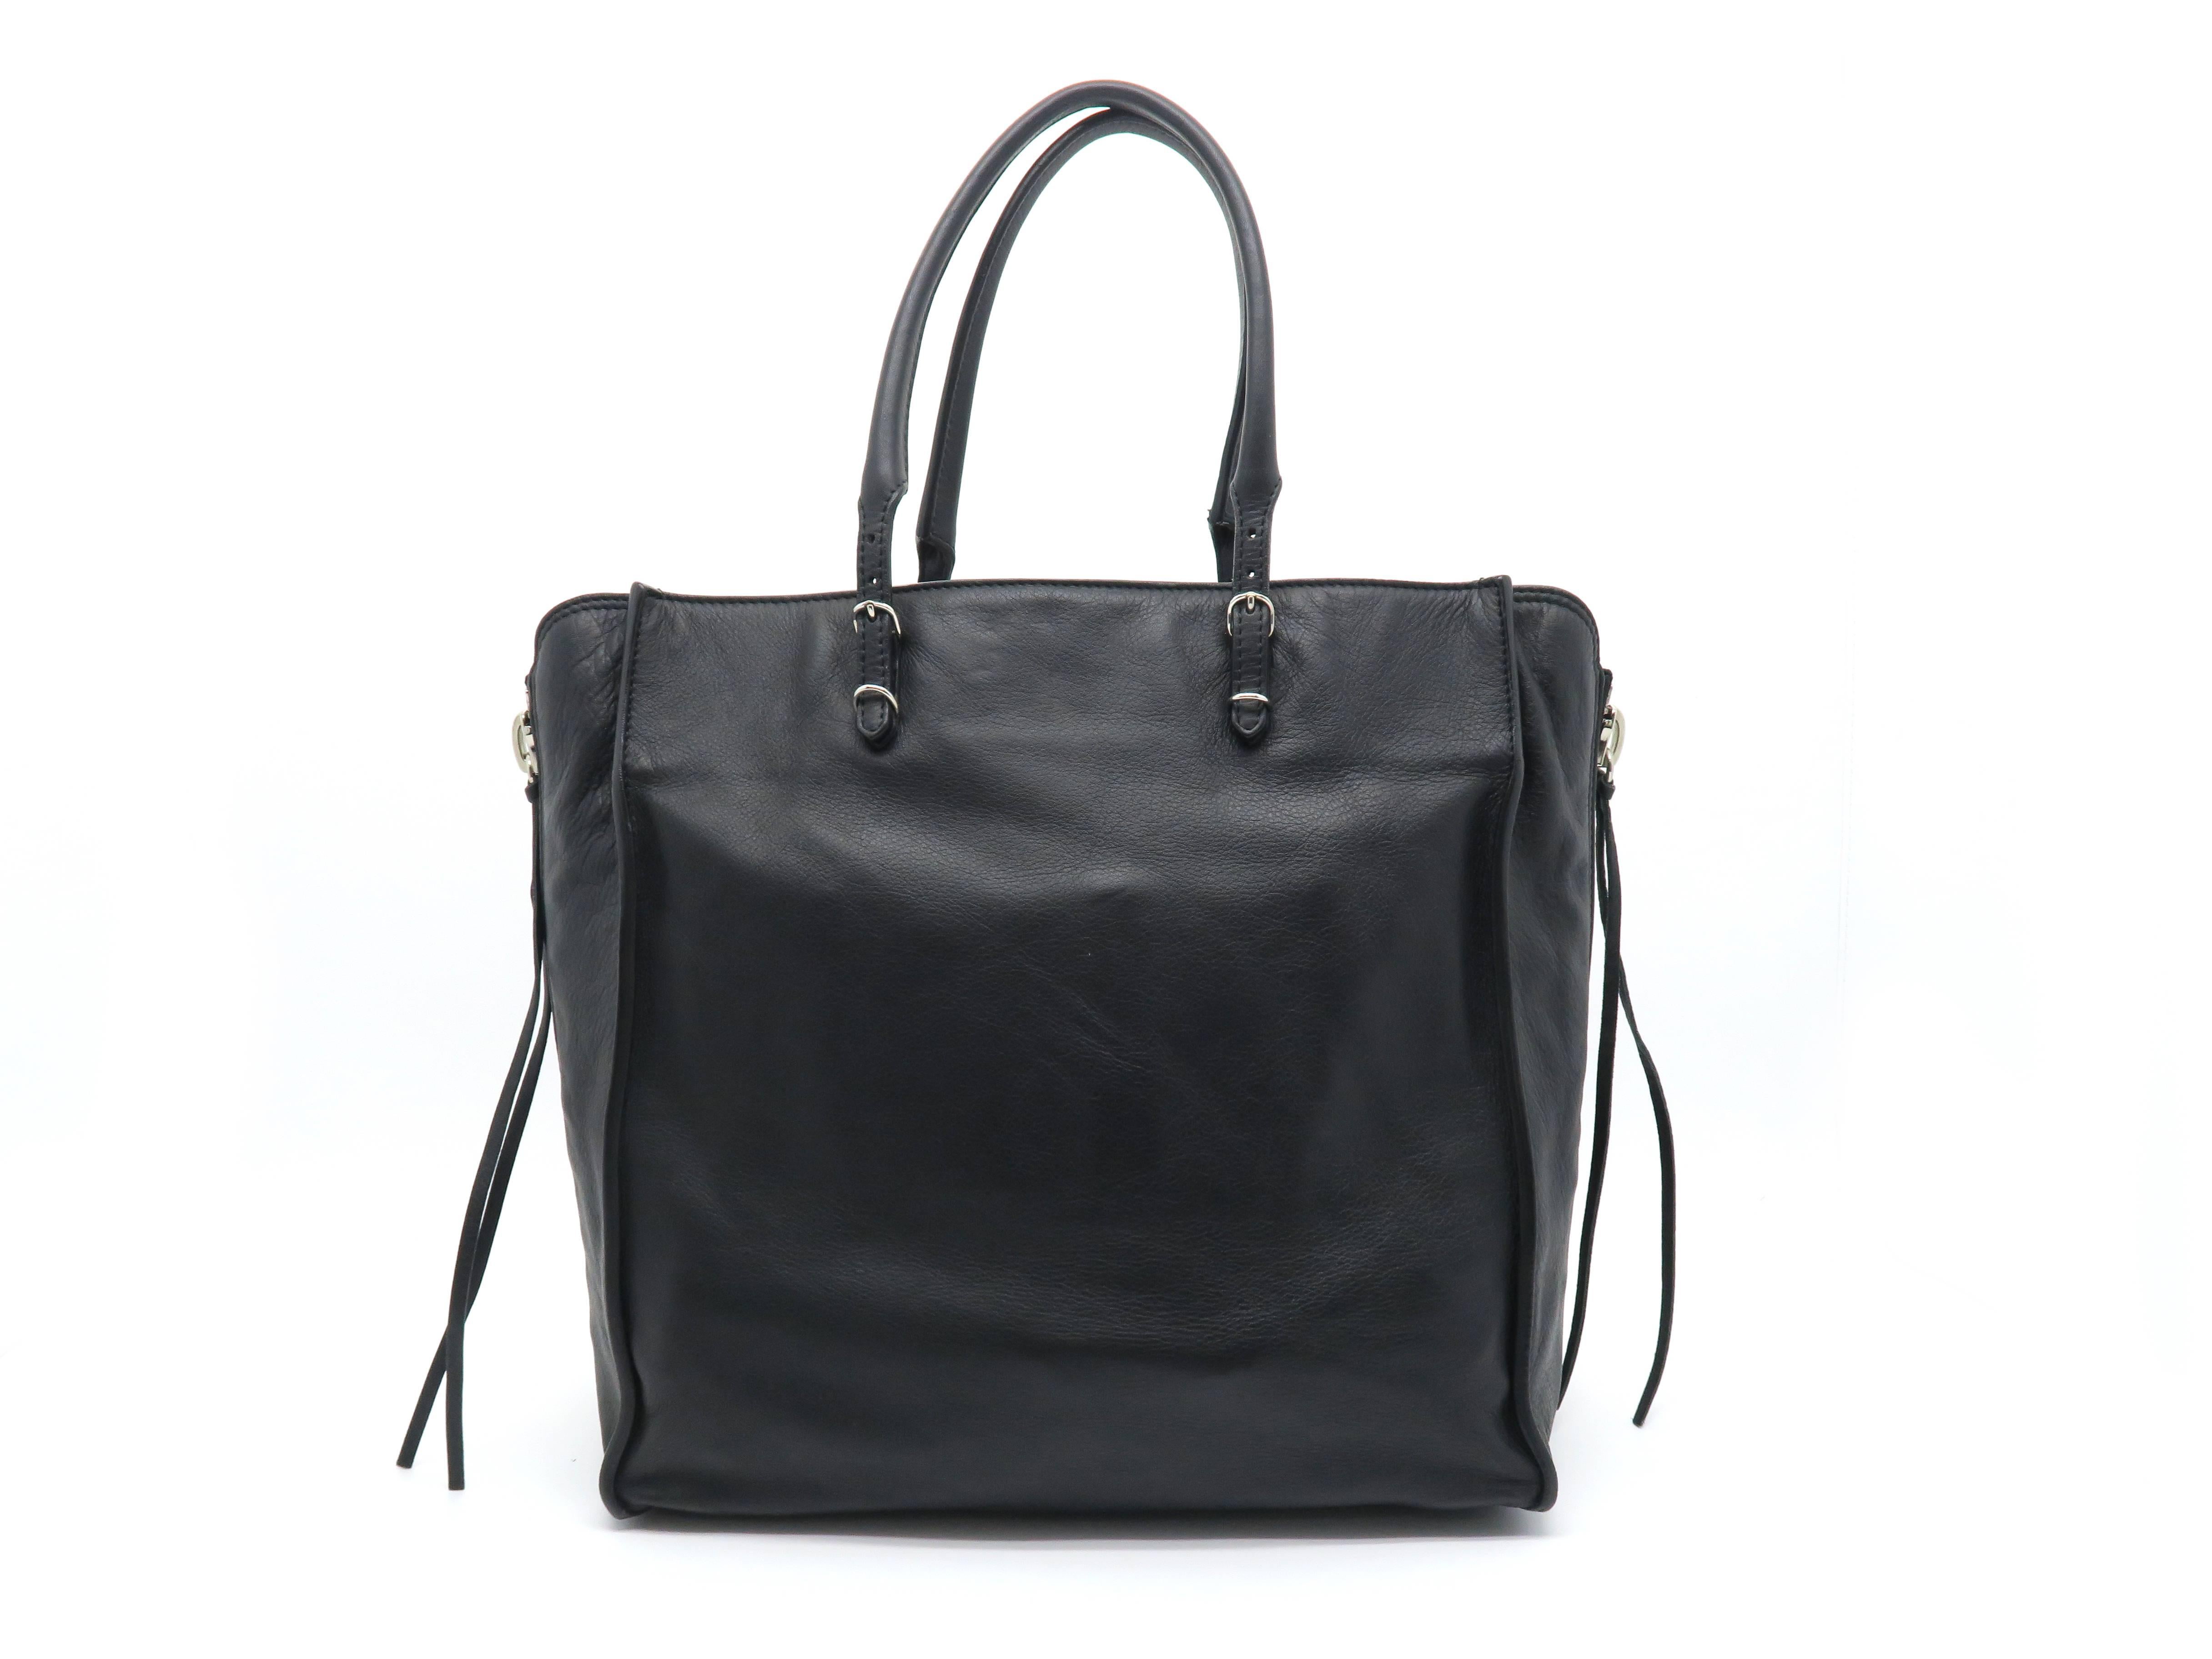 Balenciaga Papier Zip Around Black Calfskin Leather Tote Bag In Excellent Condition For Sale In Kowloon, HK